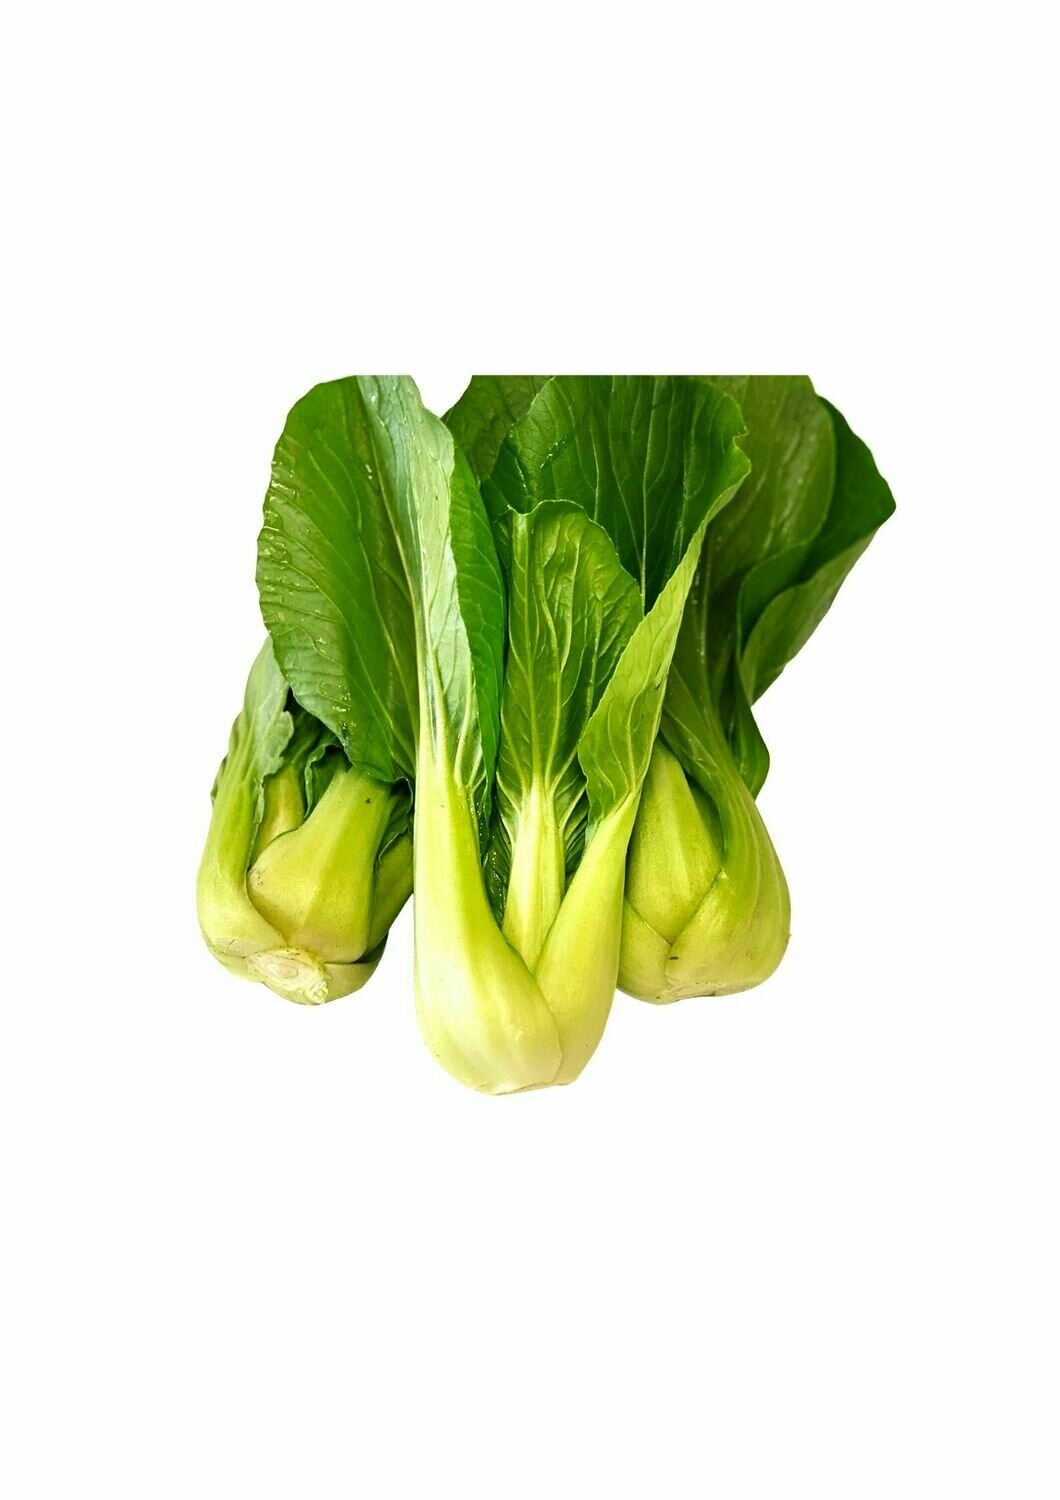 BOK CHOY BABY BUNCH OF 3 OR 4